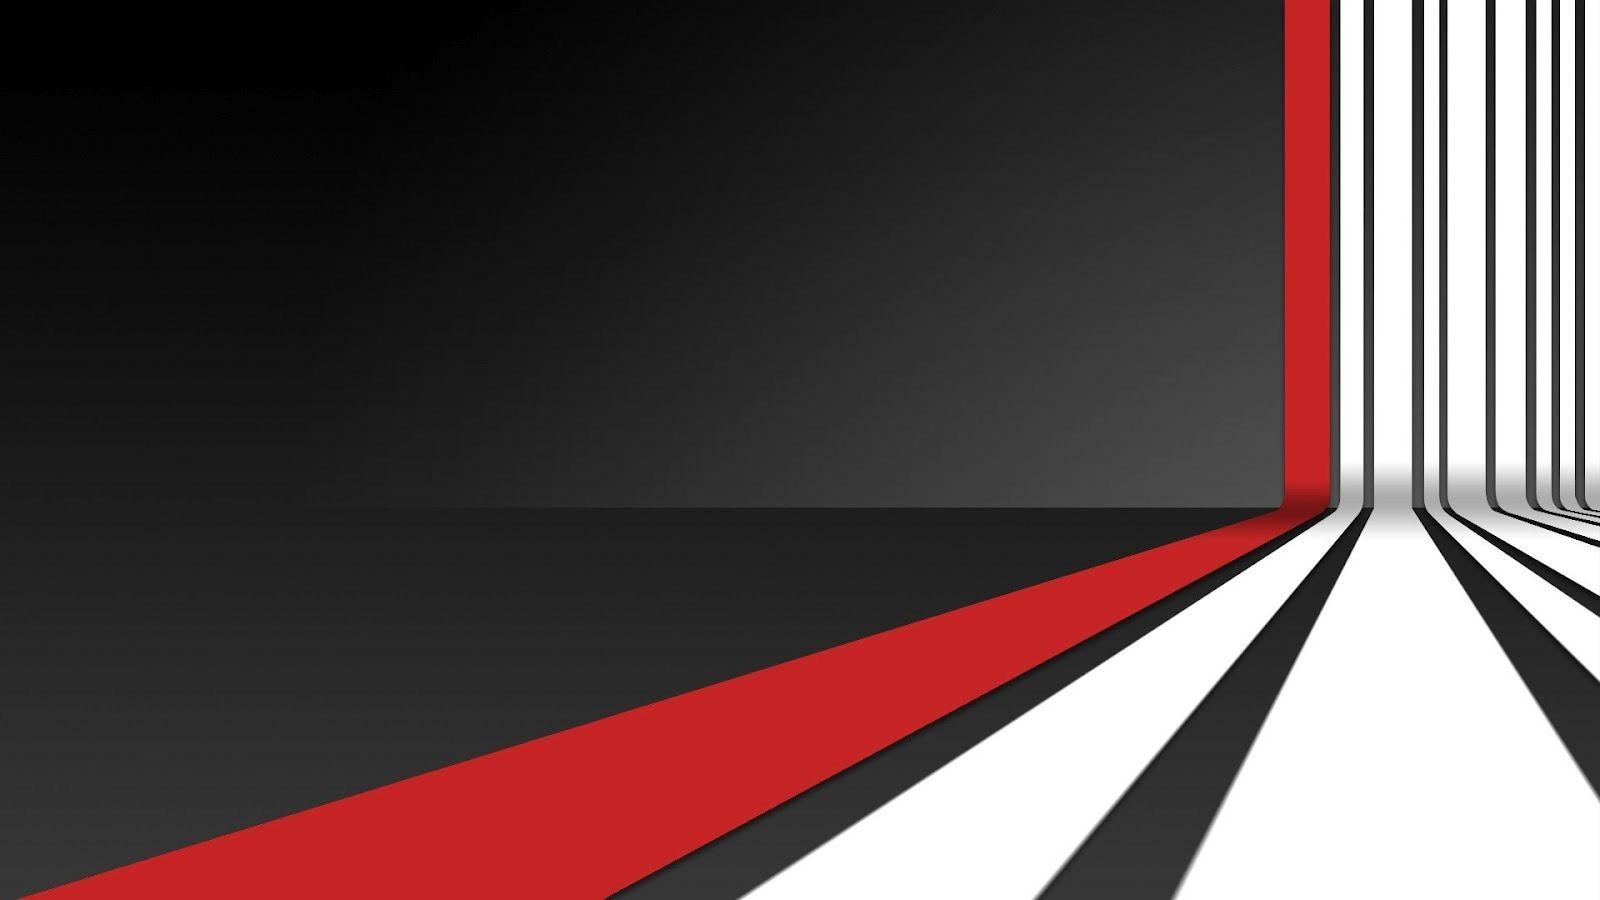 White with Red Line Logo - Black-and-Red-HD-Wallpapers-White-Line-Backgrounds | Vegas Legal ...